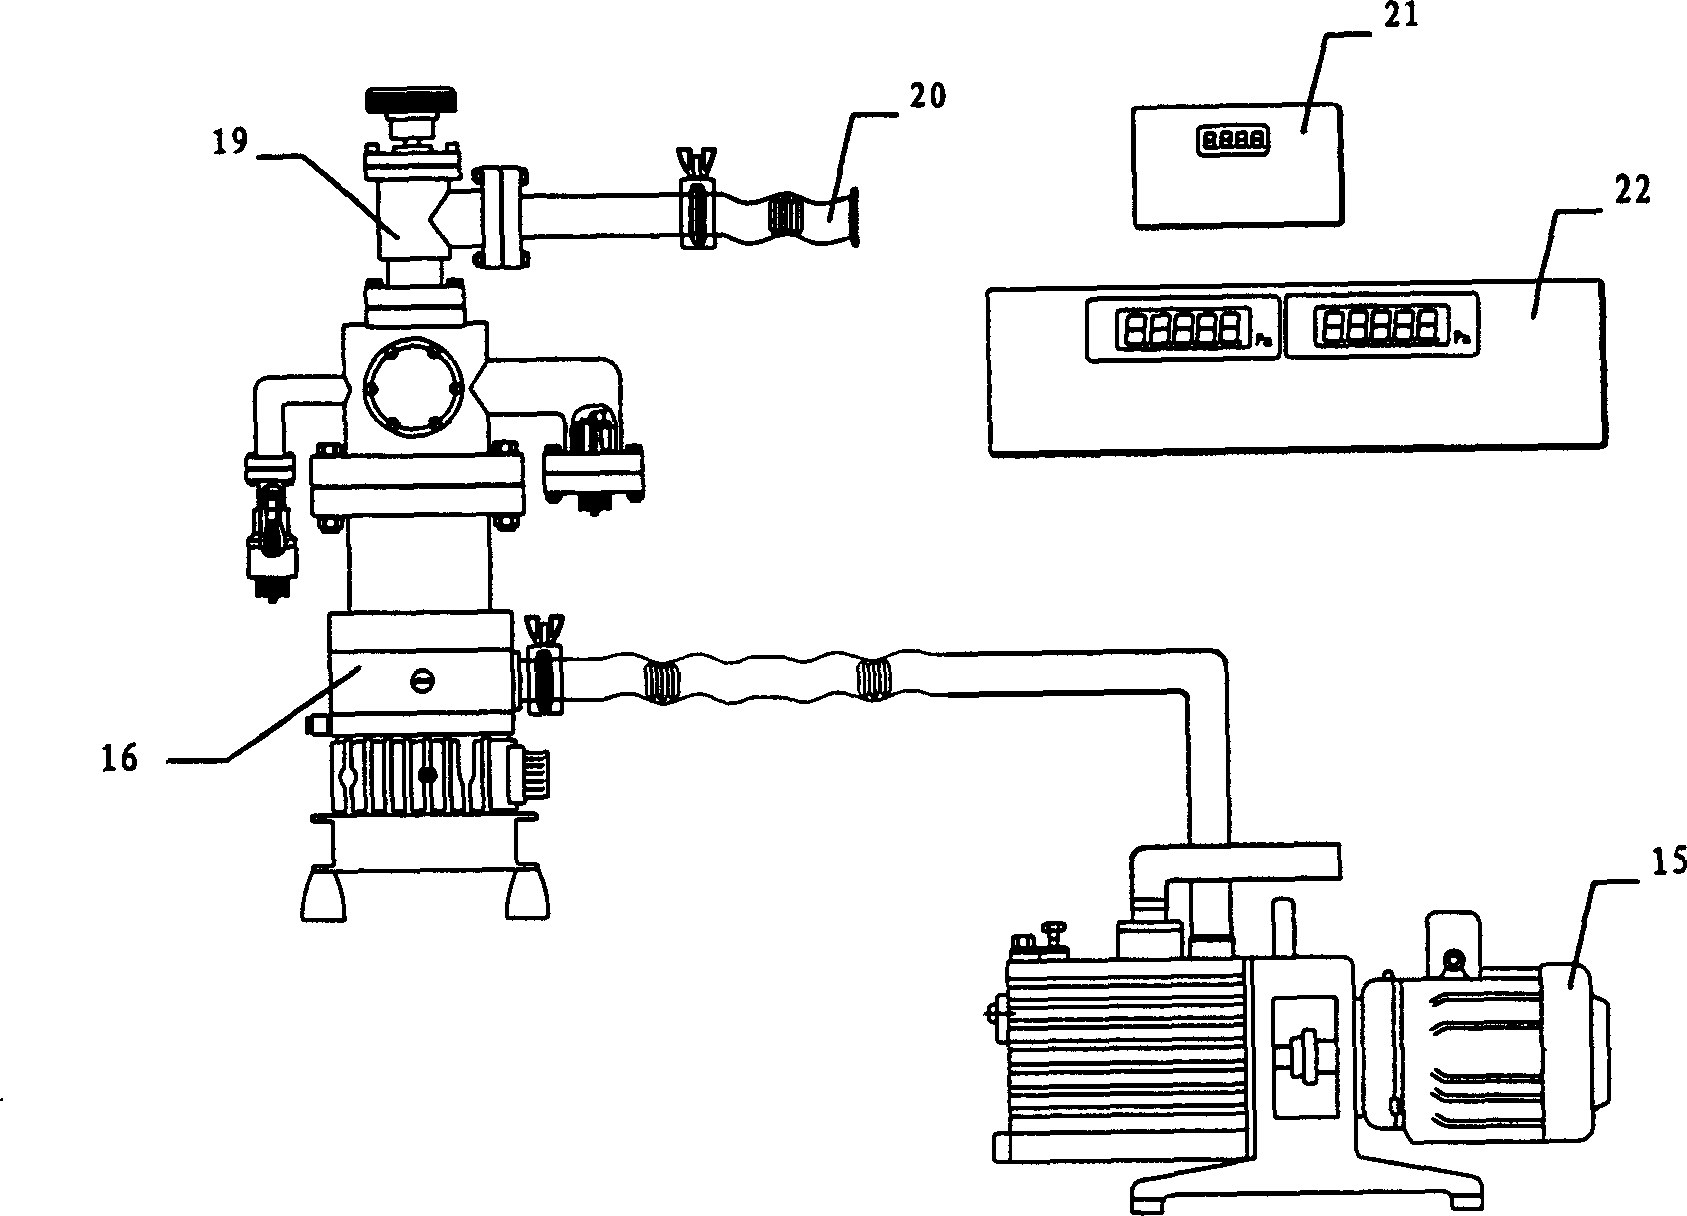 Mobile and combined chemical reaction process testing system